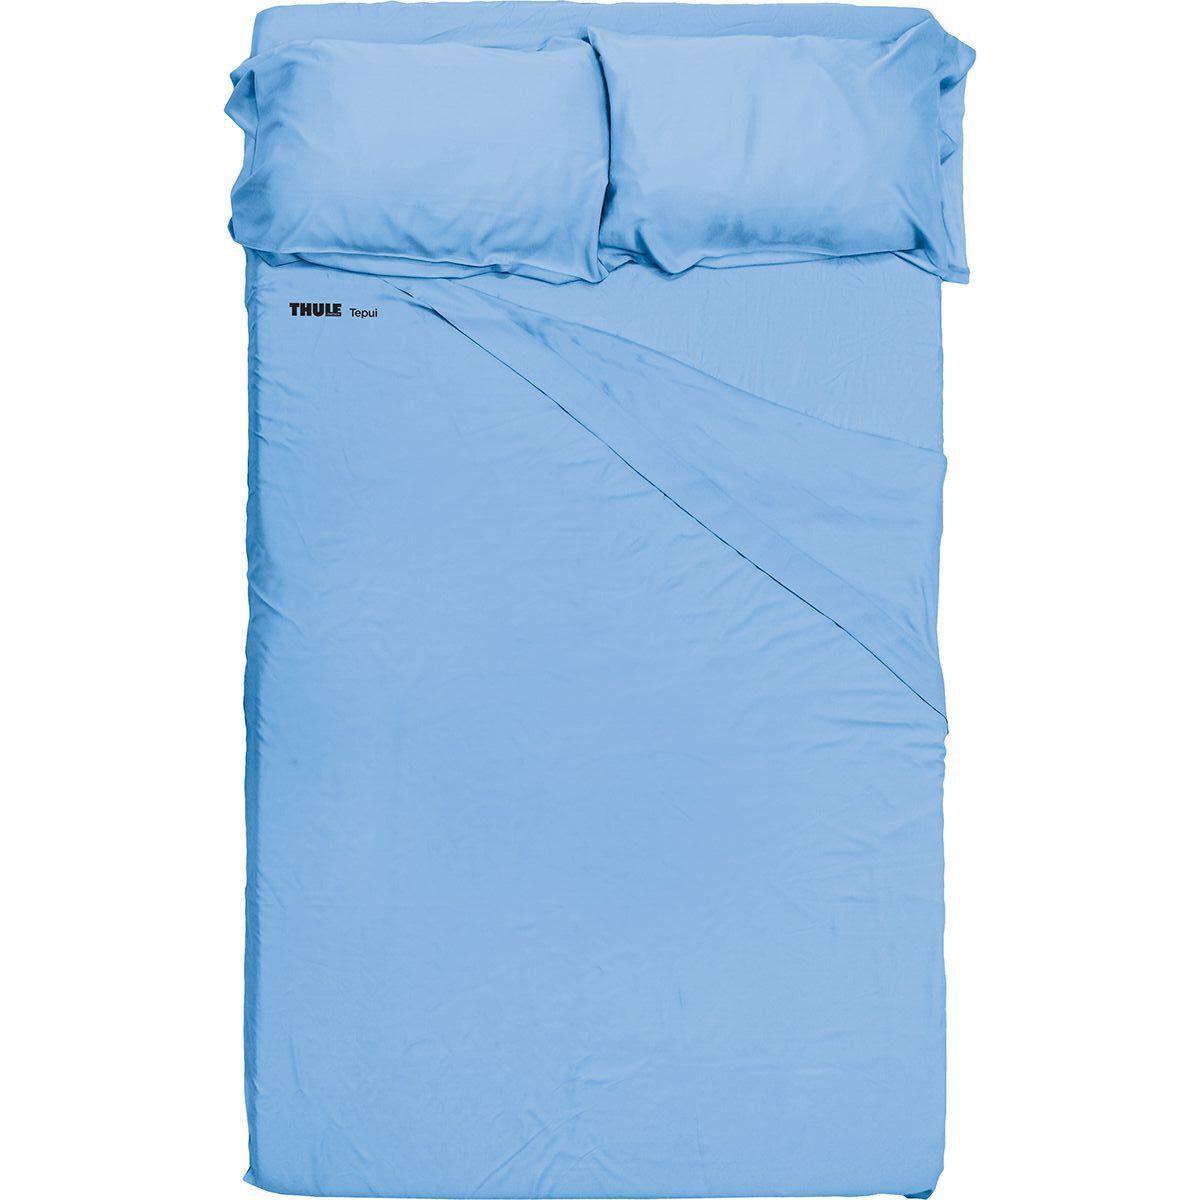 Thule Fitted Sheets for 3-Person Tents